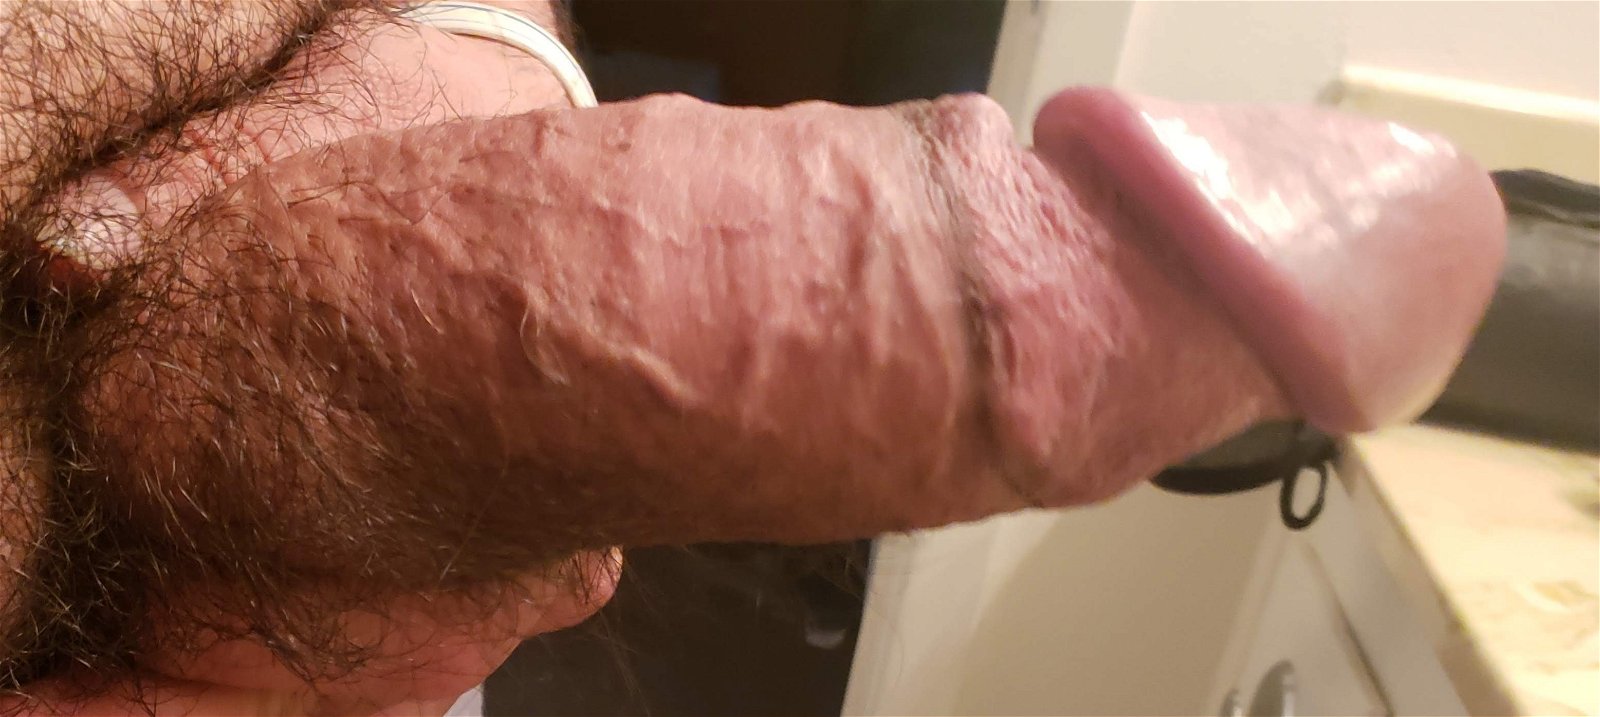 Photo by Rasz67 with the username @Rasz67,  December 25, 2019 at 11:16 PM. The post is about the topic Thick cocks and the text says '#thick #veiny #bigdick #fatcock #big'